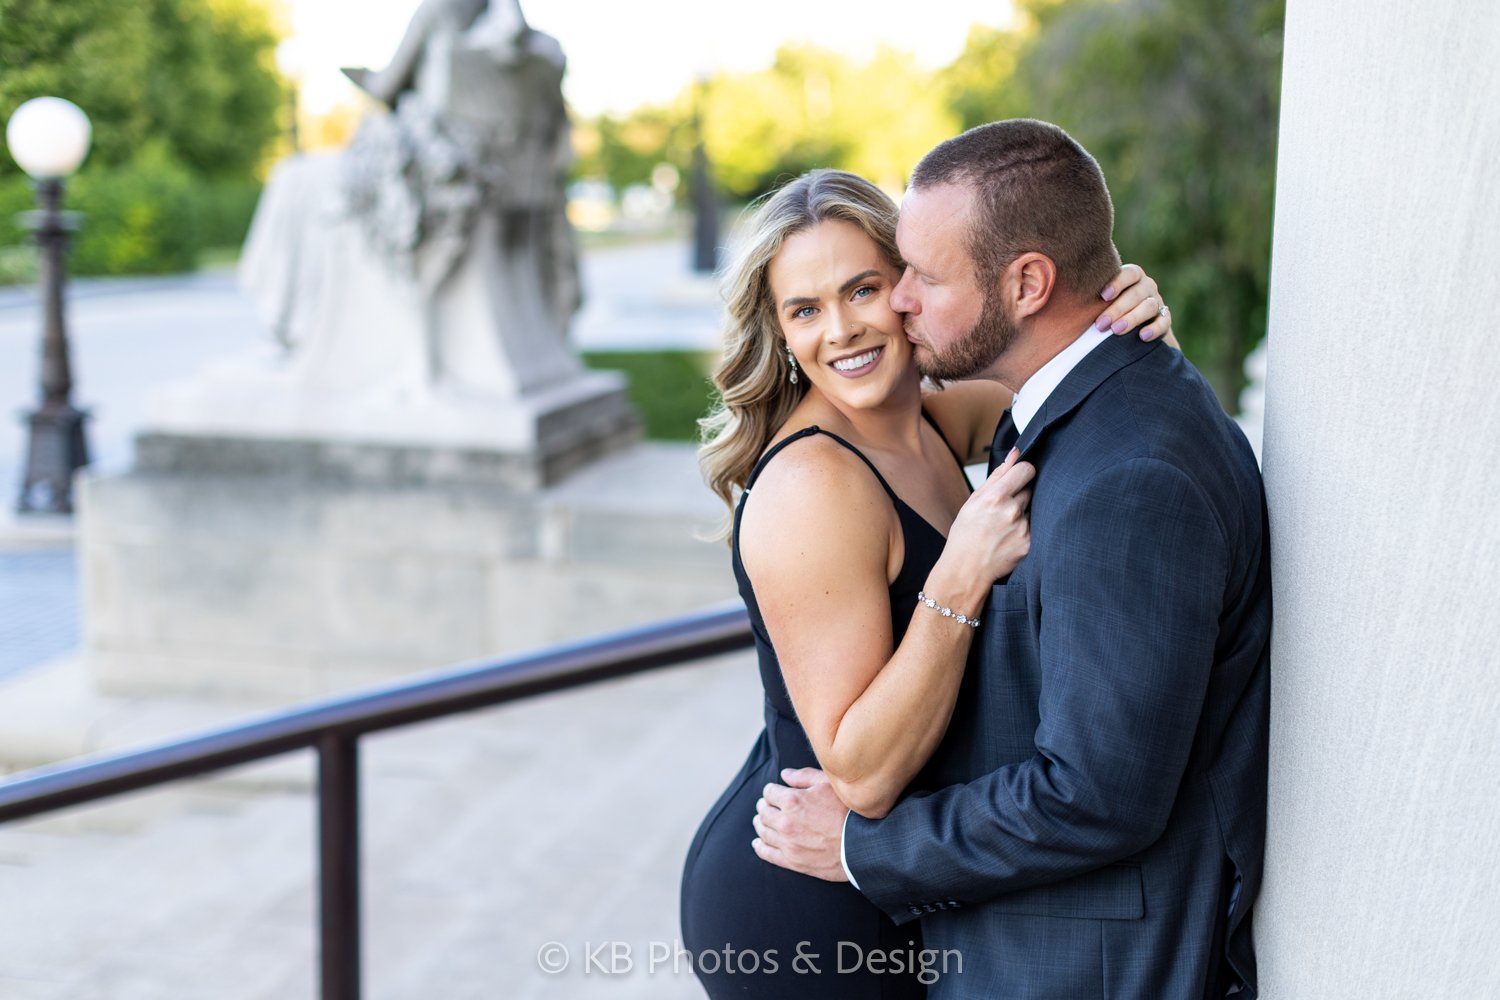 Taylor Drew engagement photography at St Louis Missouri STL Art Museum in Forest Park with best engagement wedding photographer KB Photos and Design of St. Louis Chesterfield Missouri